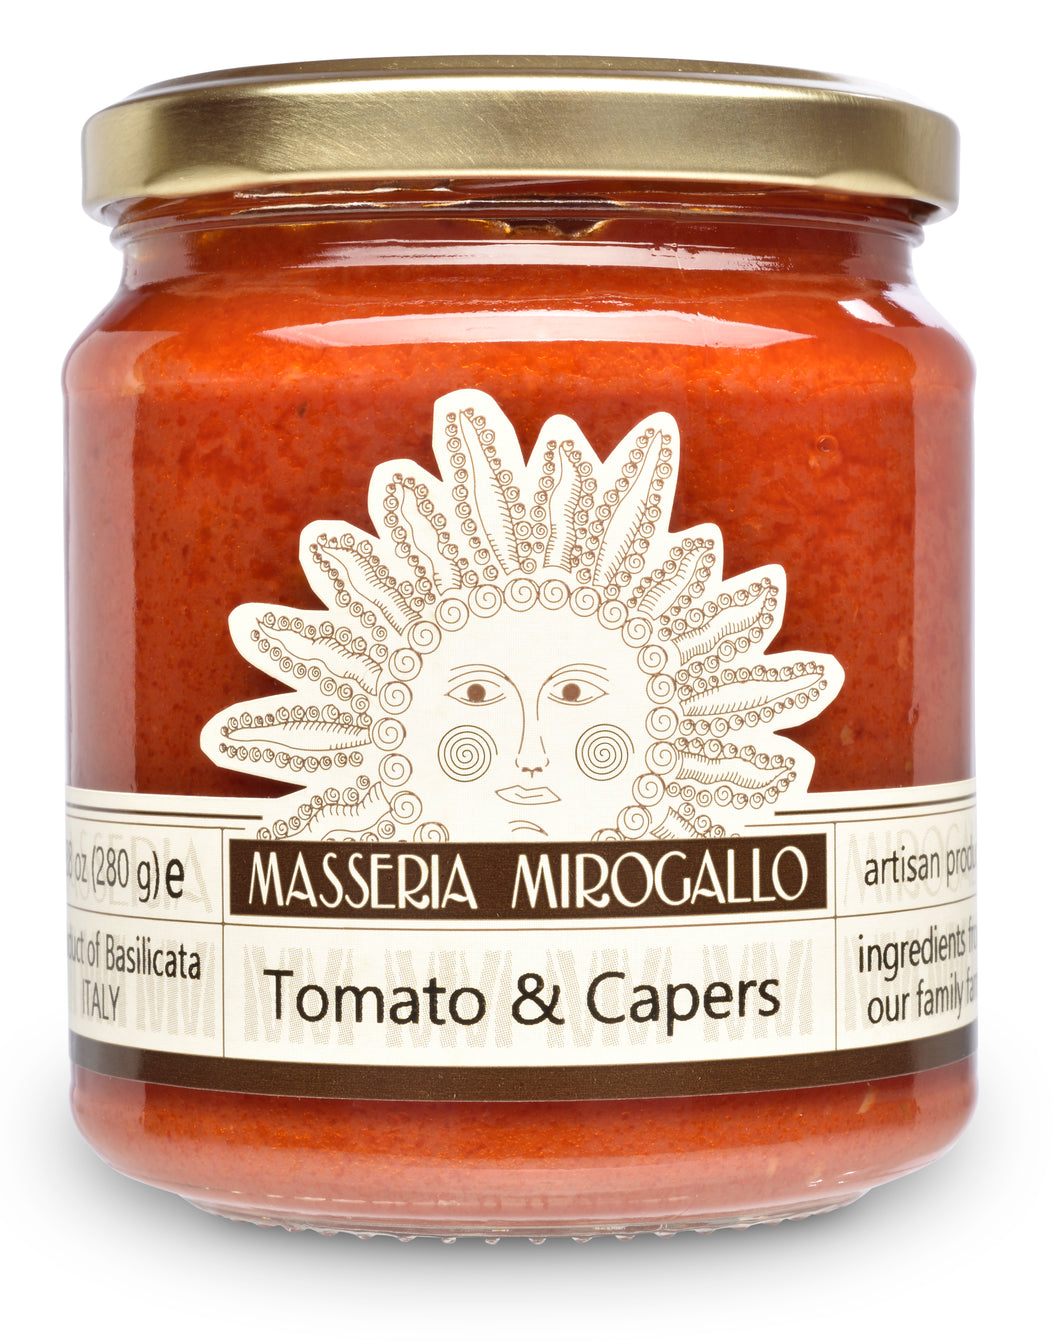 Tomato Sauce with Capers & Olives from Masseria Mirogallo